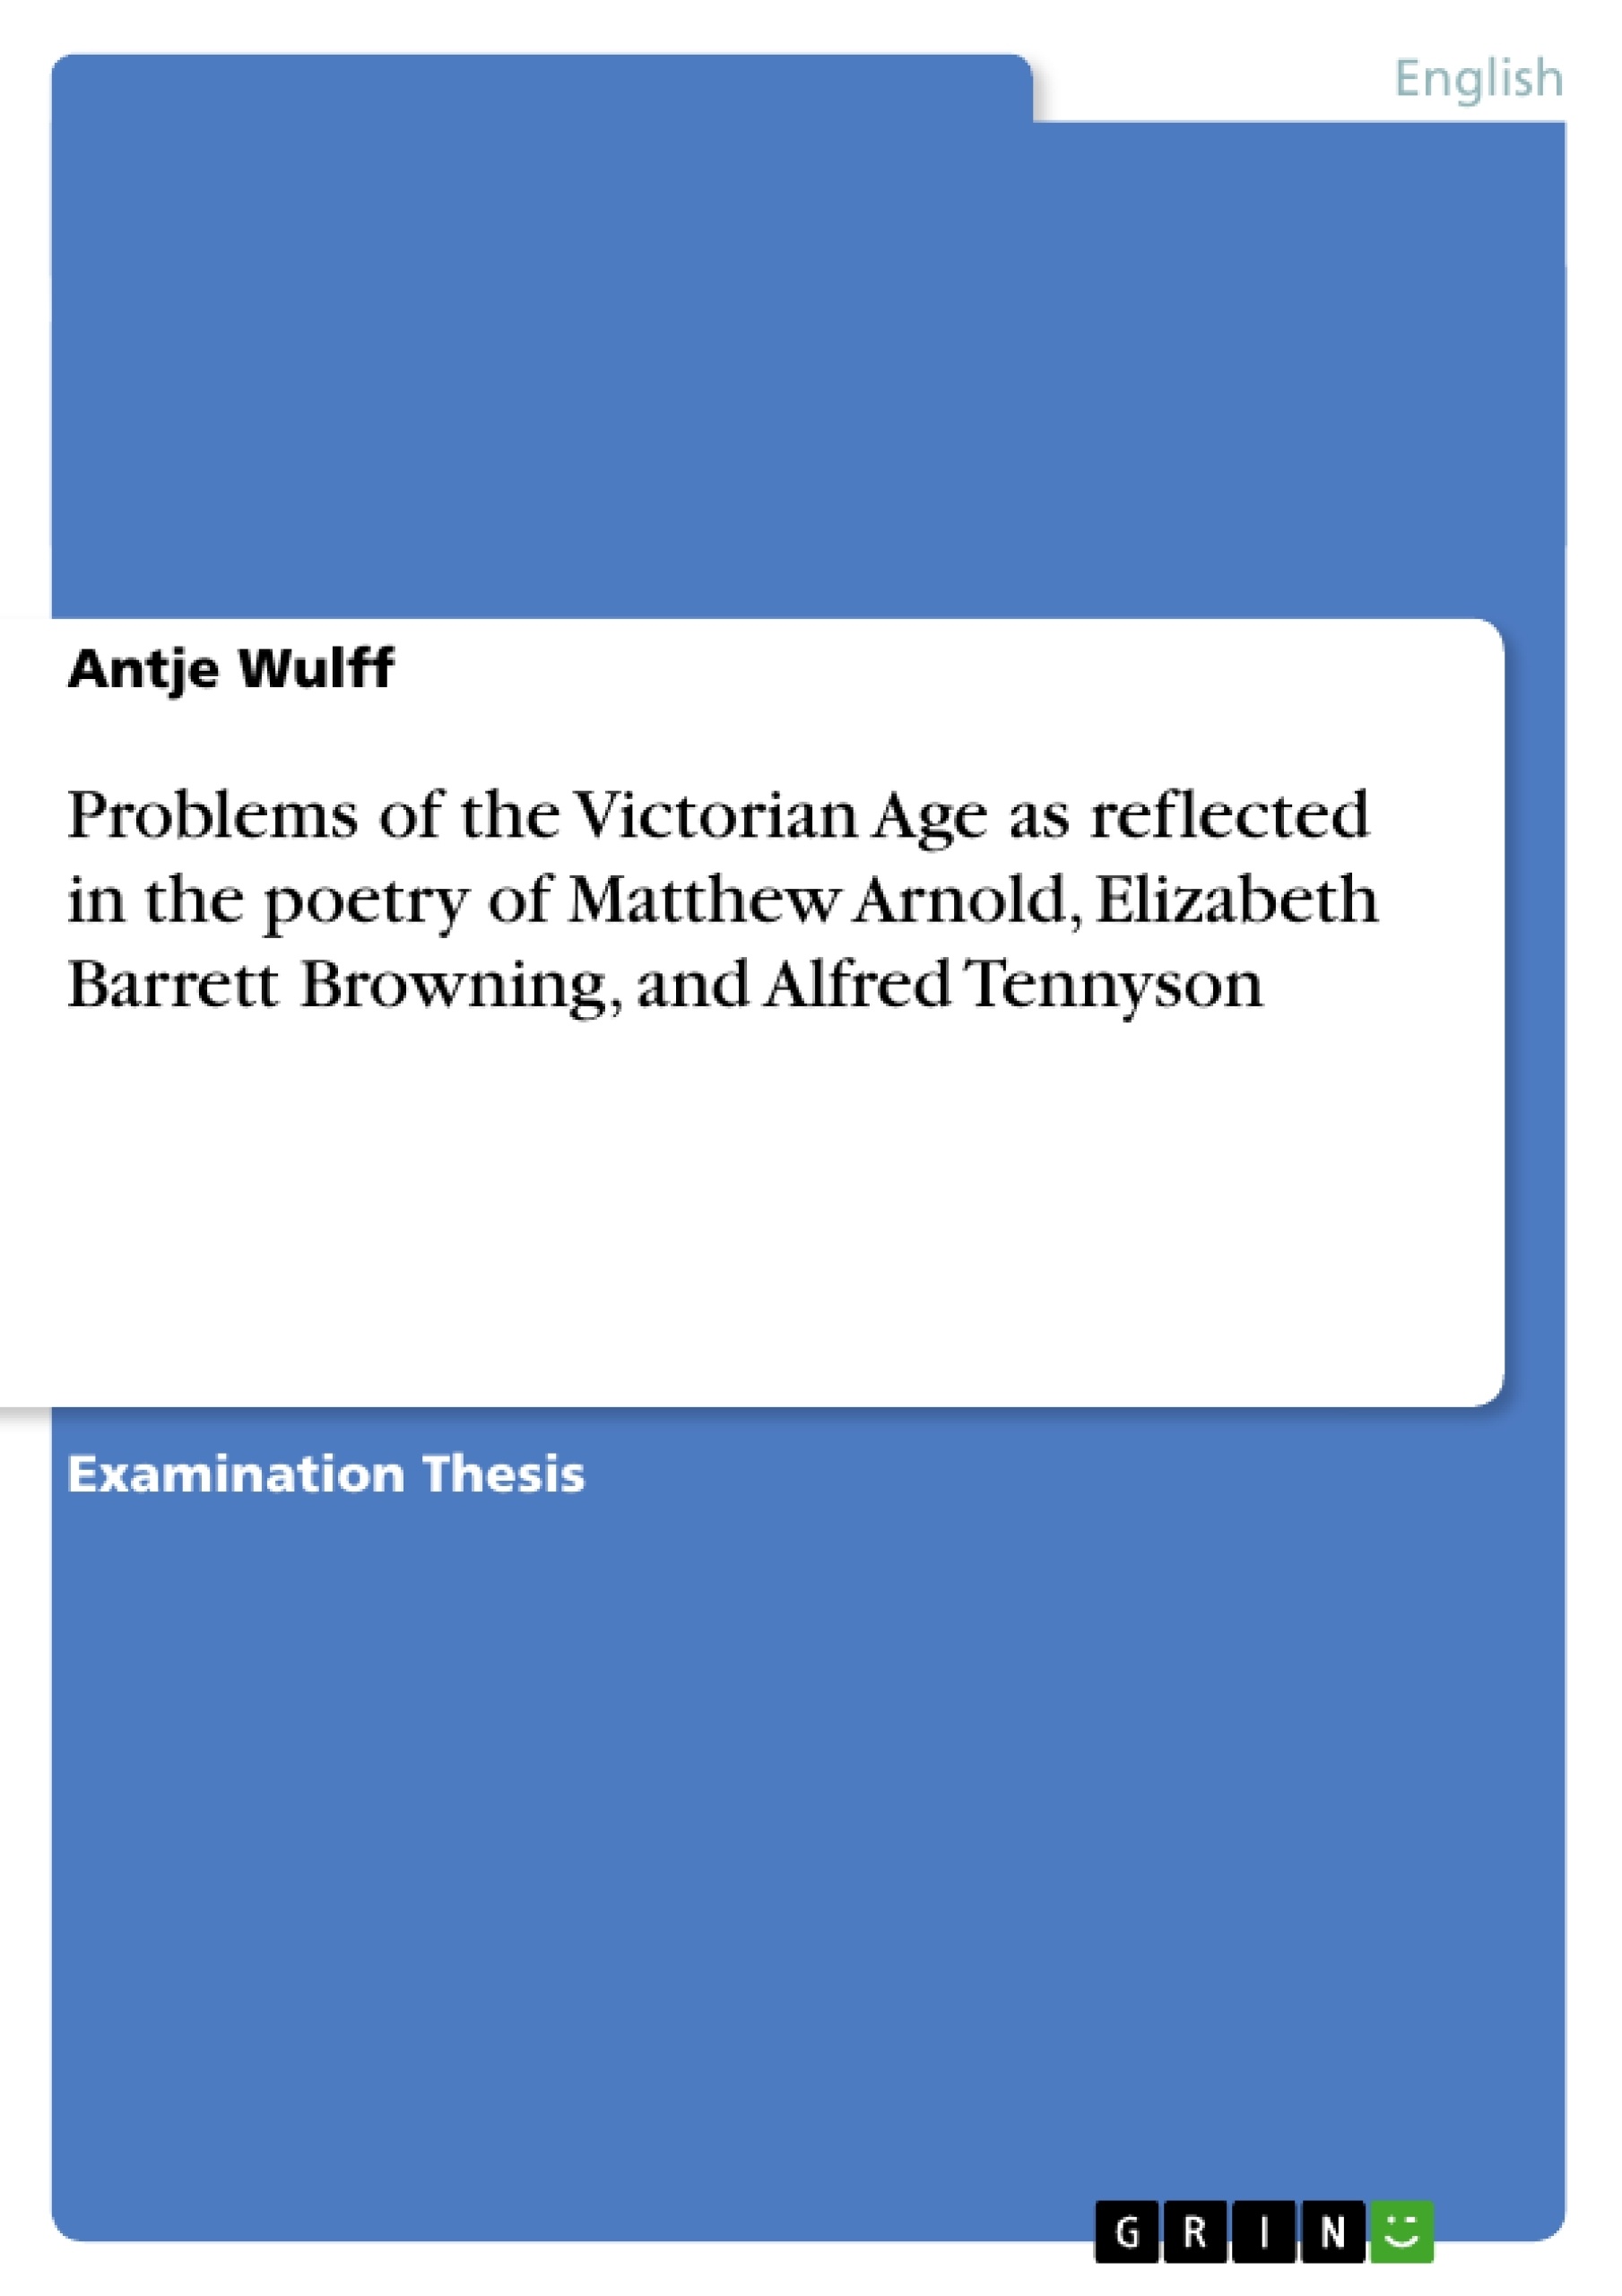 Título: Problems of the Victorian Age as reflected in the poetry of Matthew Arnold, Elizabeth Barrett Browning, and Alfred Tennyson